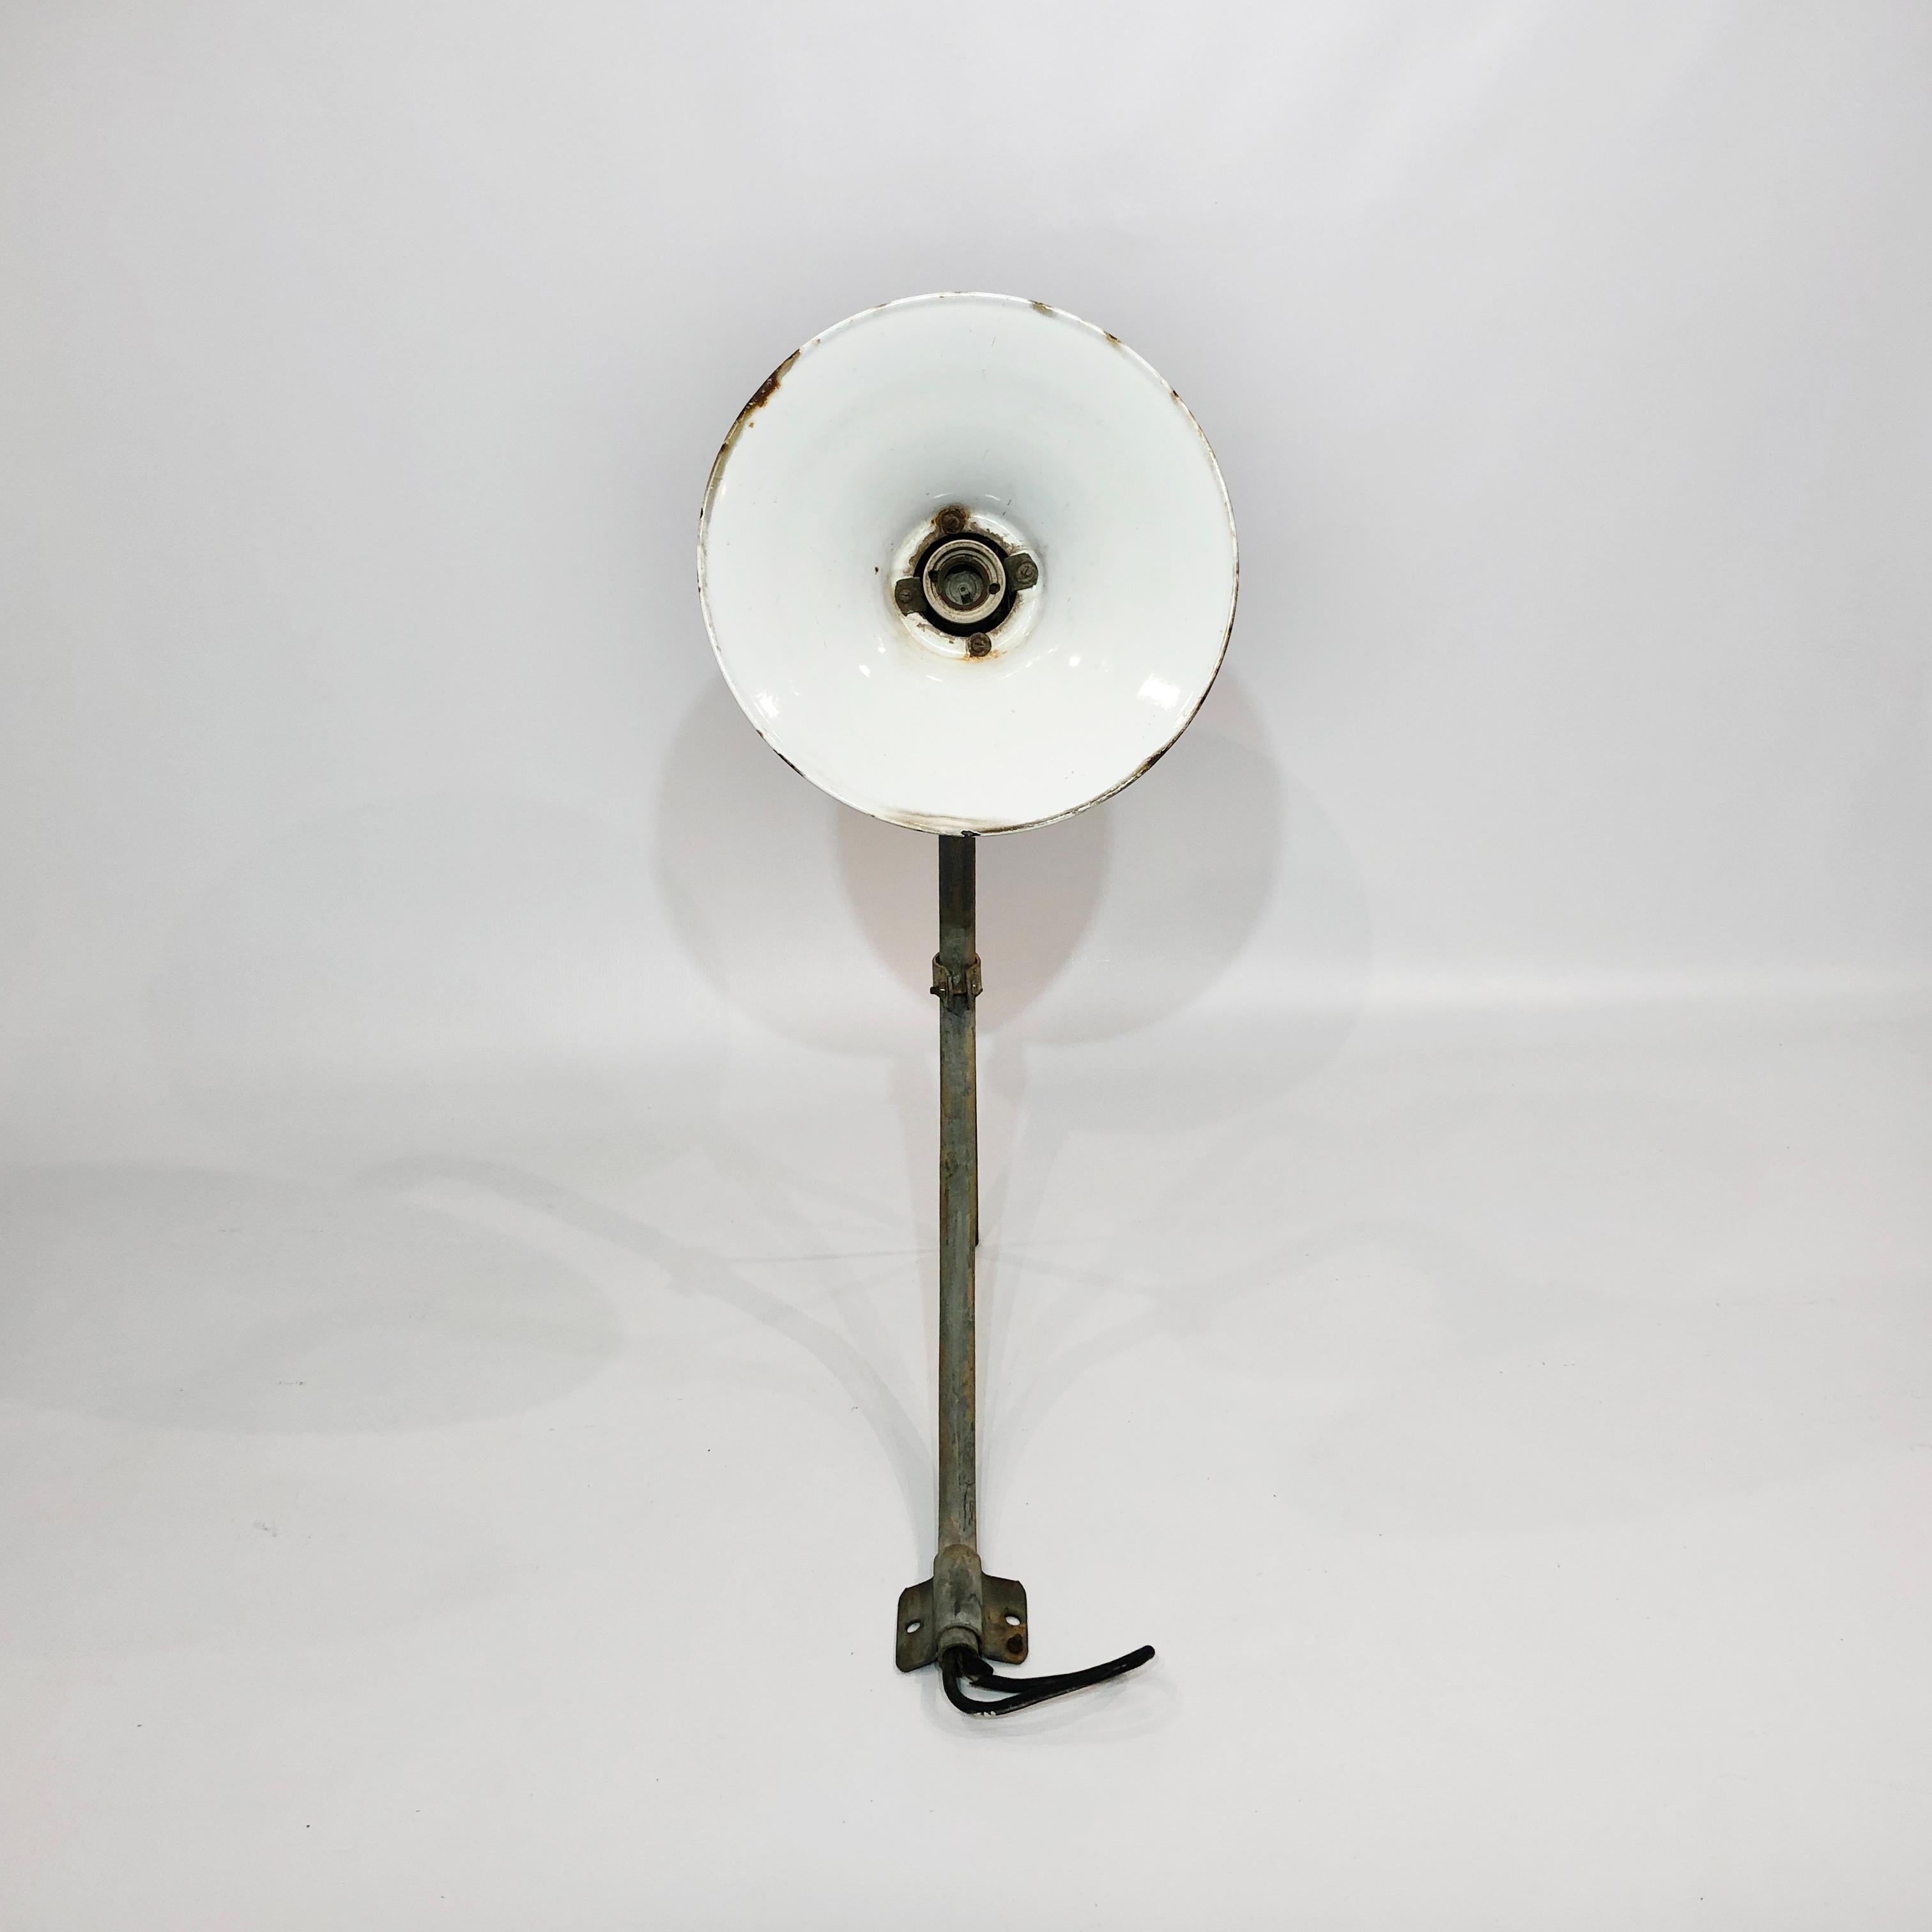 Large Industrial Wall Light 2 of 3 50s Vintage Retro Commercial Lighting Lamp  For Sale 1